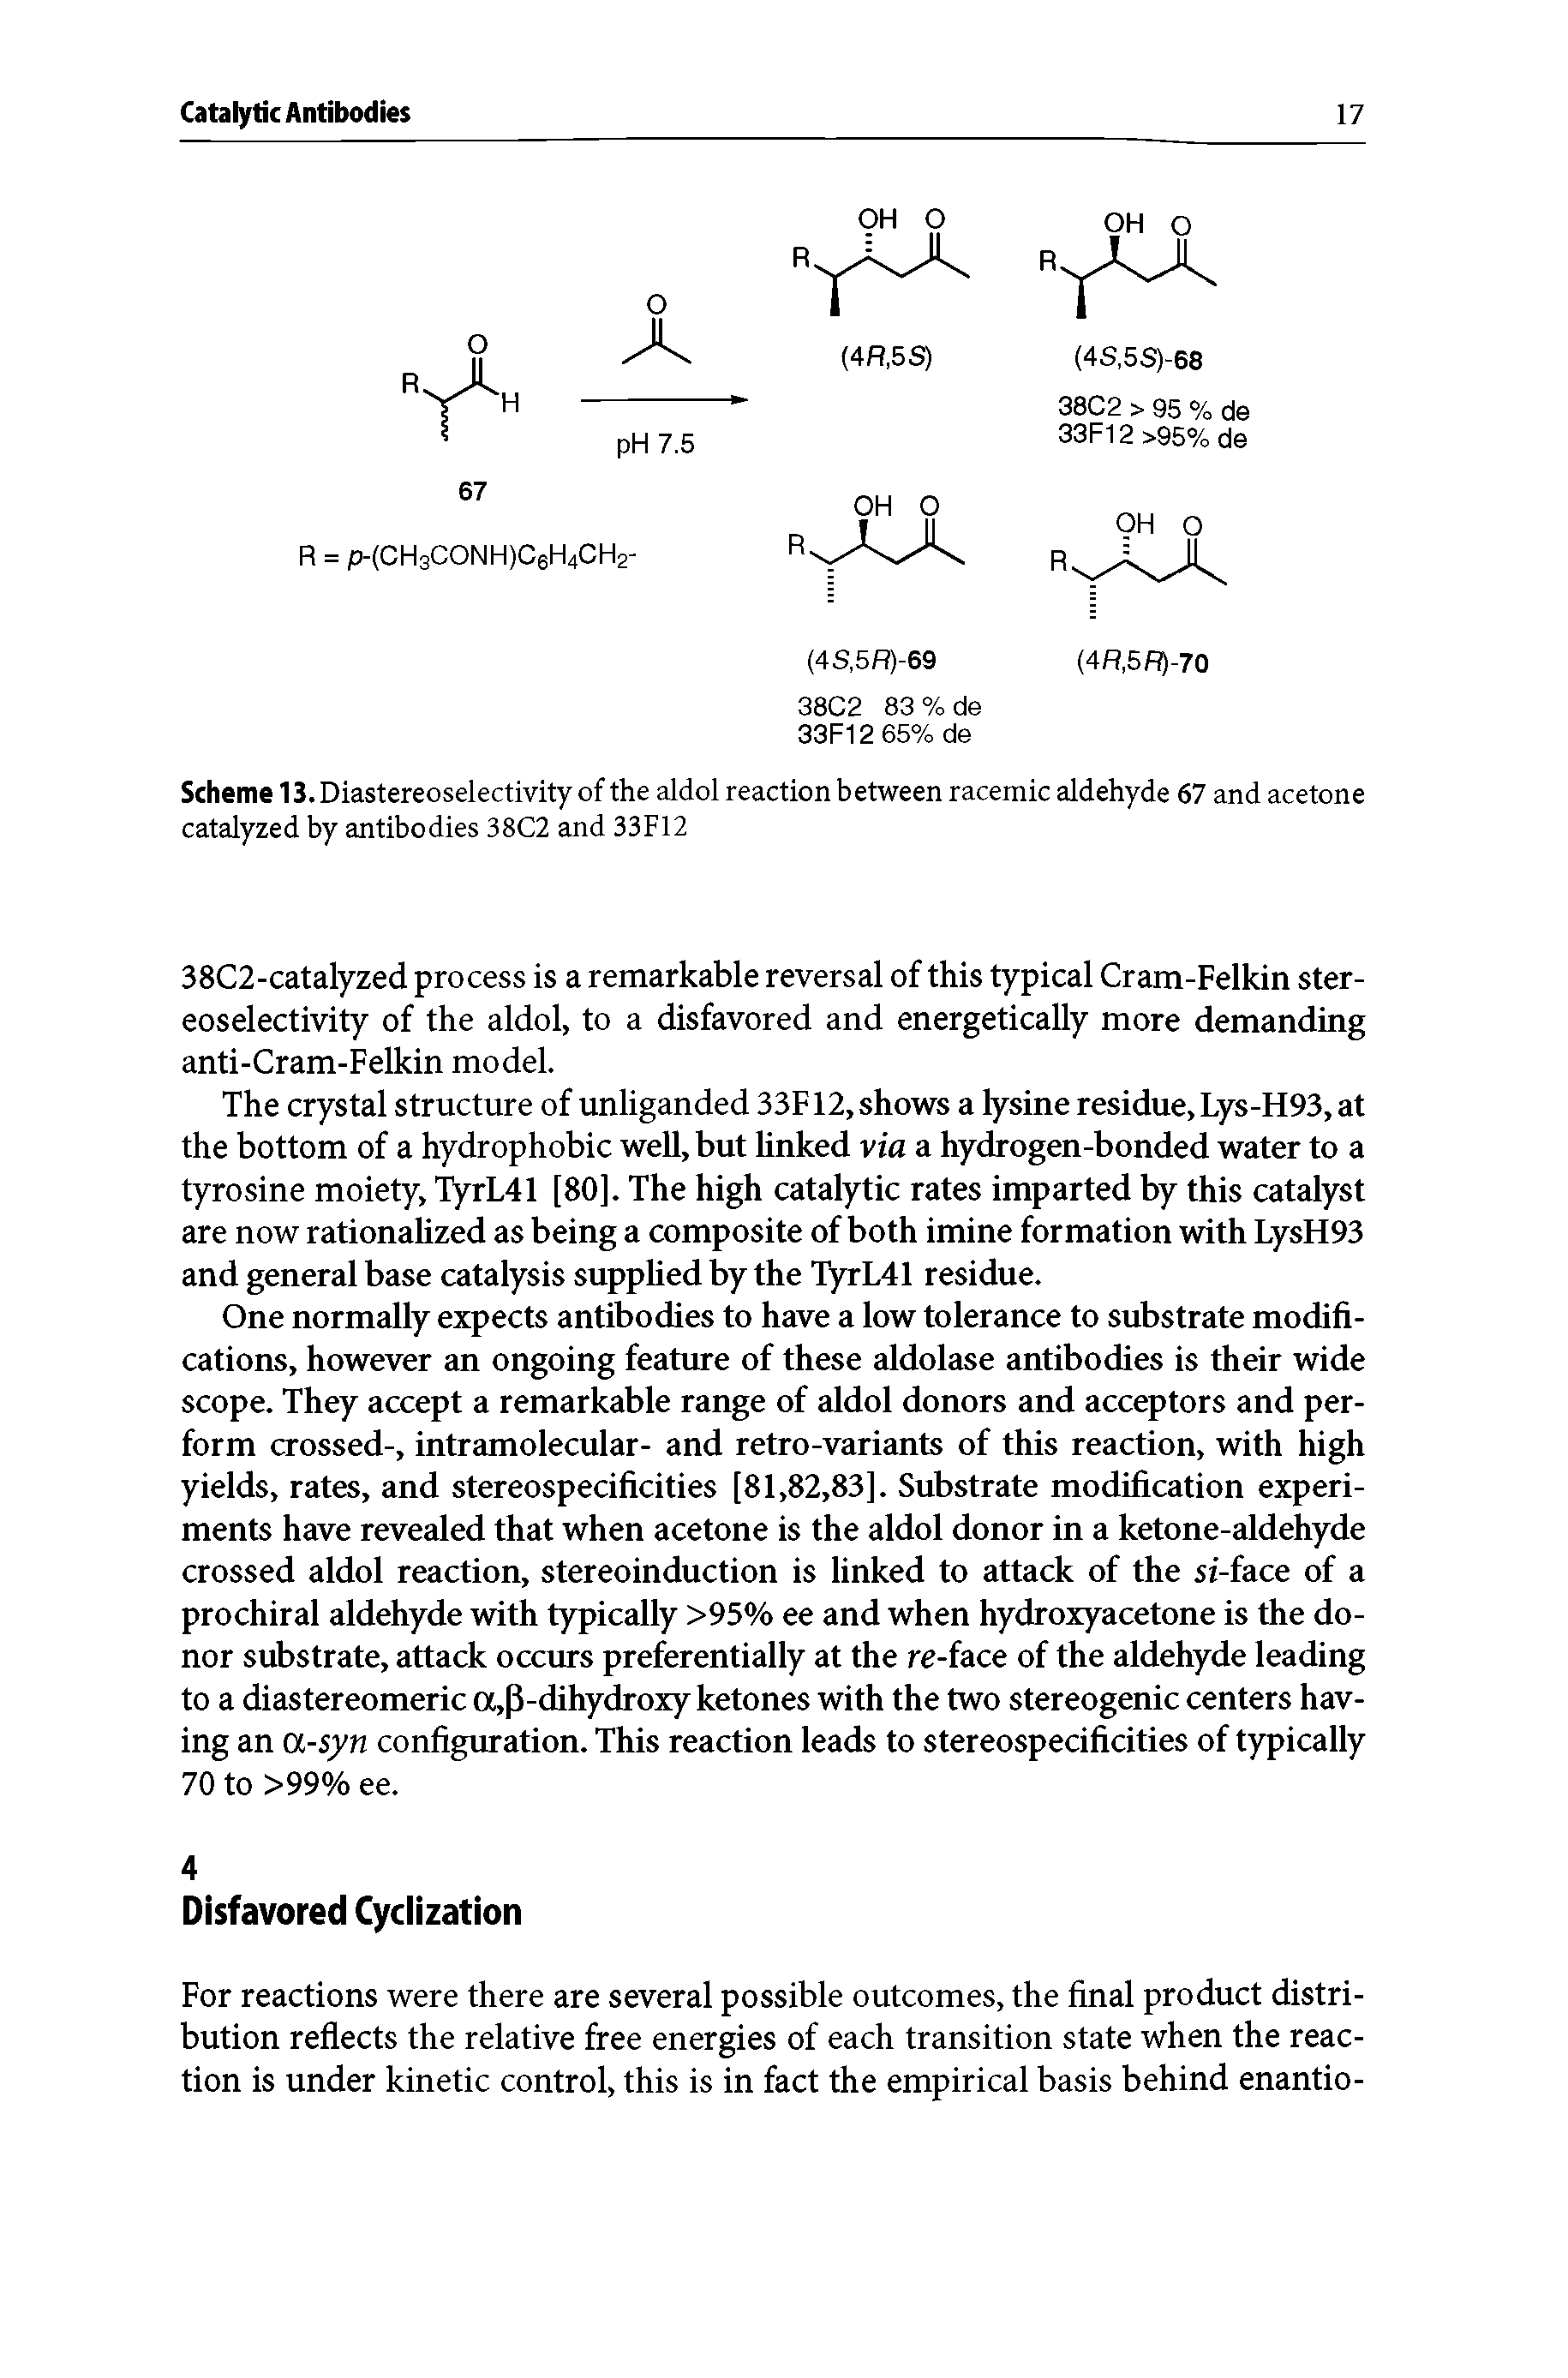 Scheme 13. Diastereoselectivity of the aldol reaction between racemic aldehyde 67 and acetone catalyzed by antibodies 38C2 and 33F12...